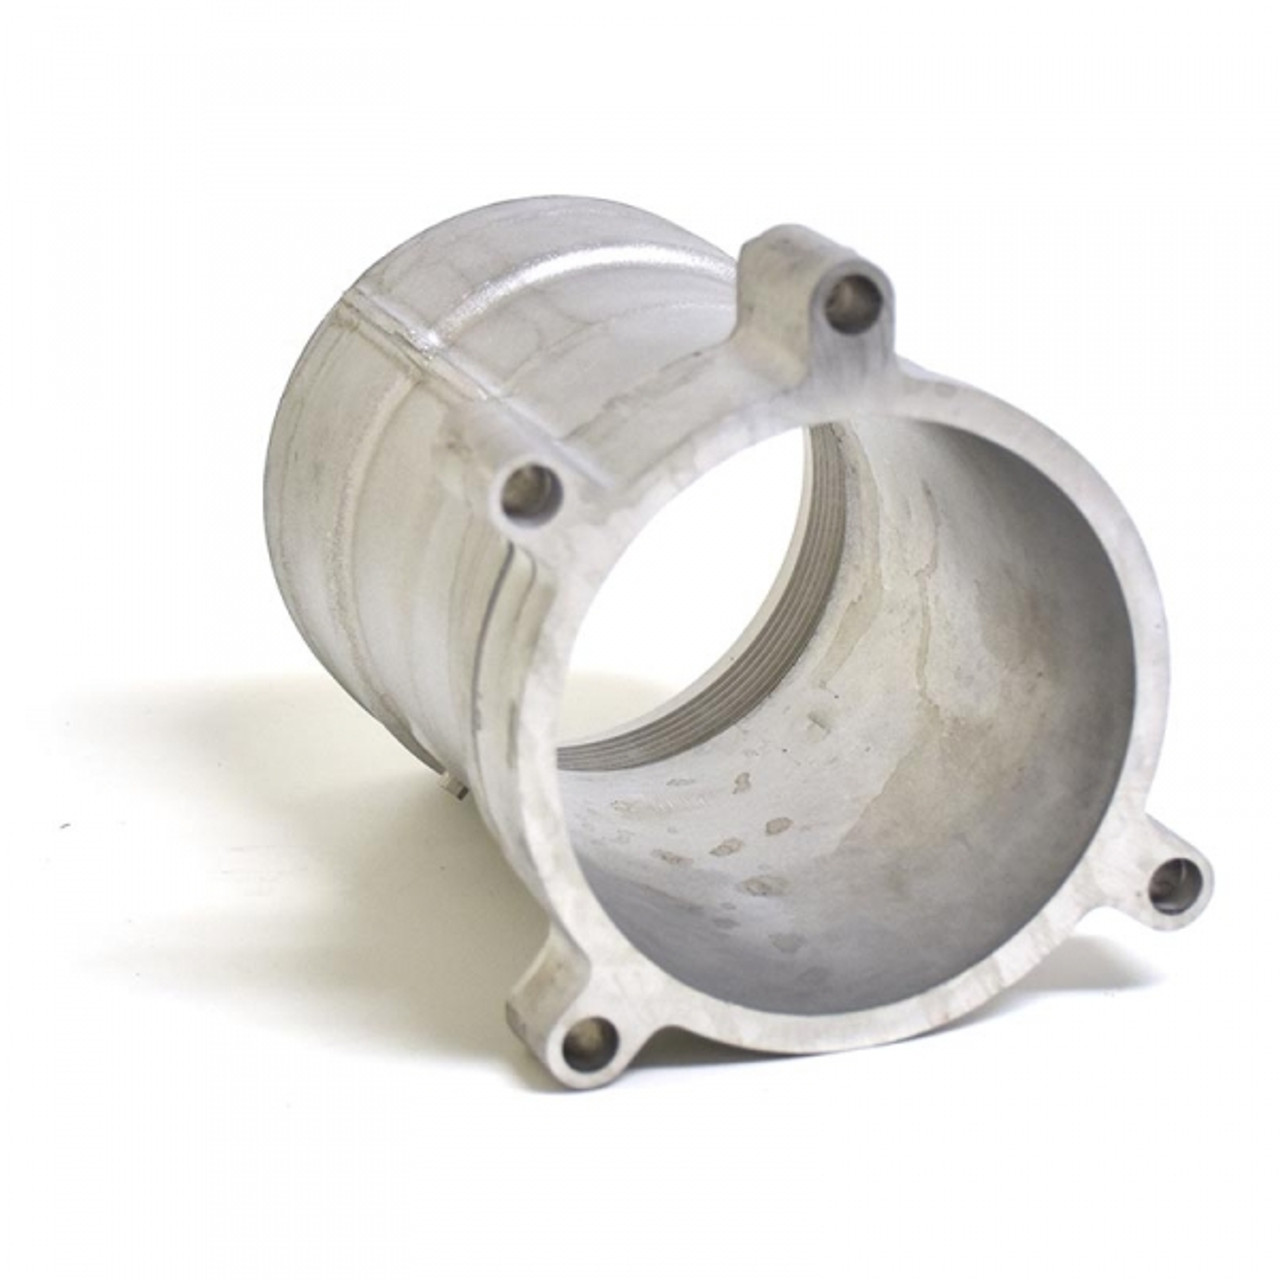 FORD OIL FILTER HOUSING 2008 to 2010 6.4L POWERSTROKE (FO3C3Z-6881-AA)-Part View